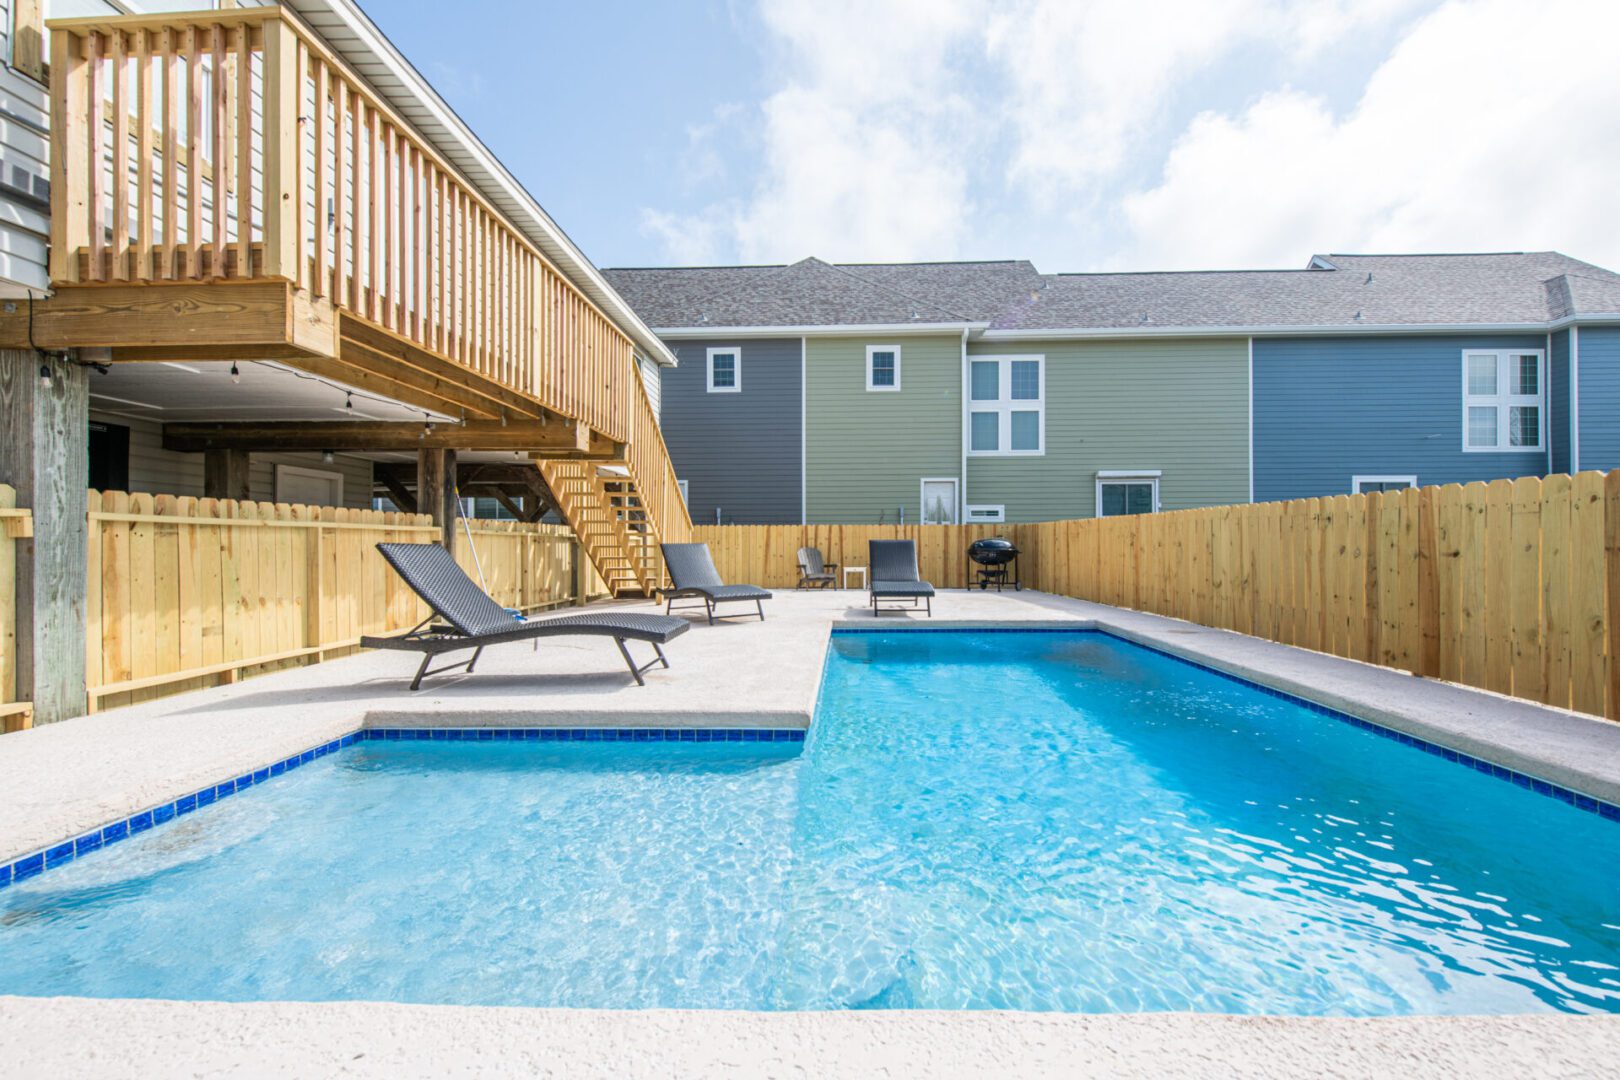 A pool with two chairs and a deck in the background.